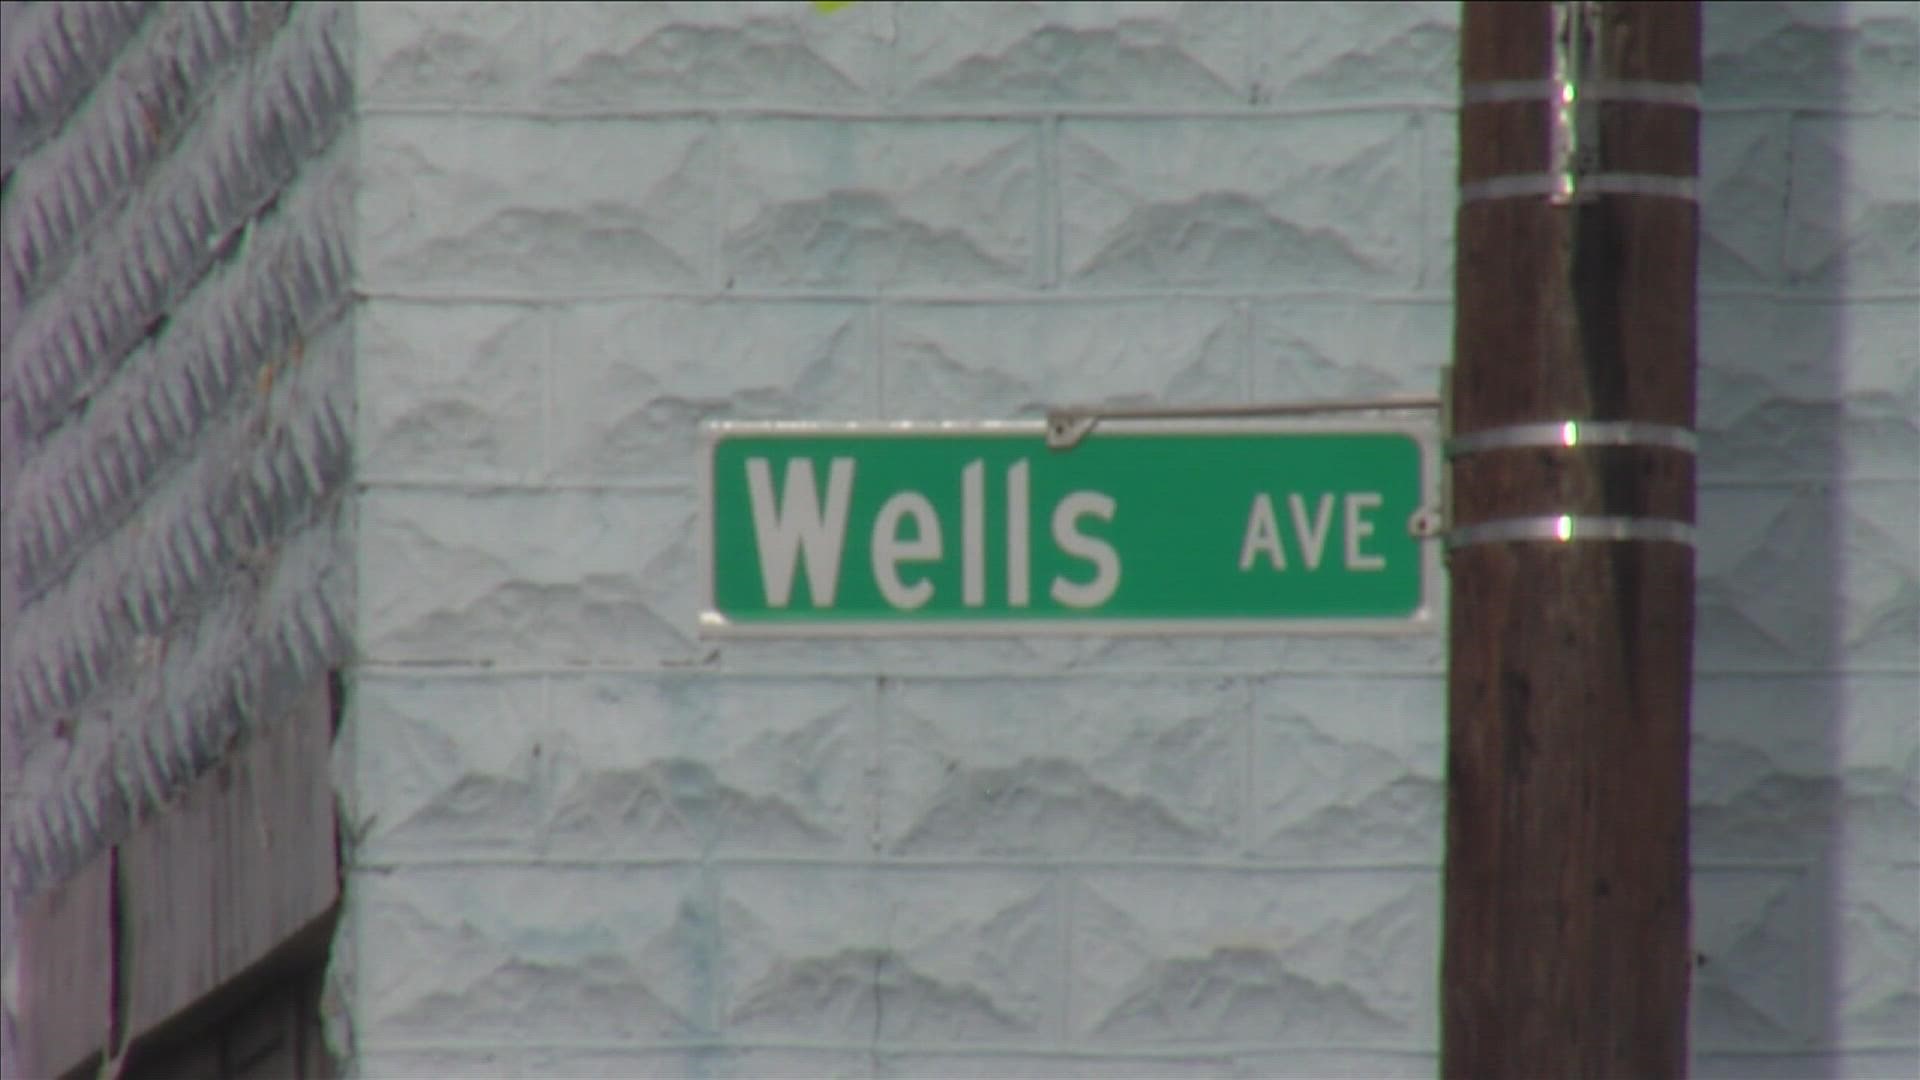 While investigating shooting in the 600 block of Wells, police said they were called to a second shooting that occurred north of the scene at Marble and Tully.